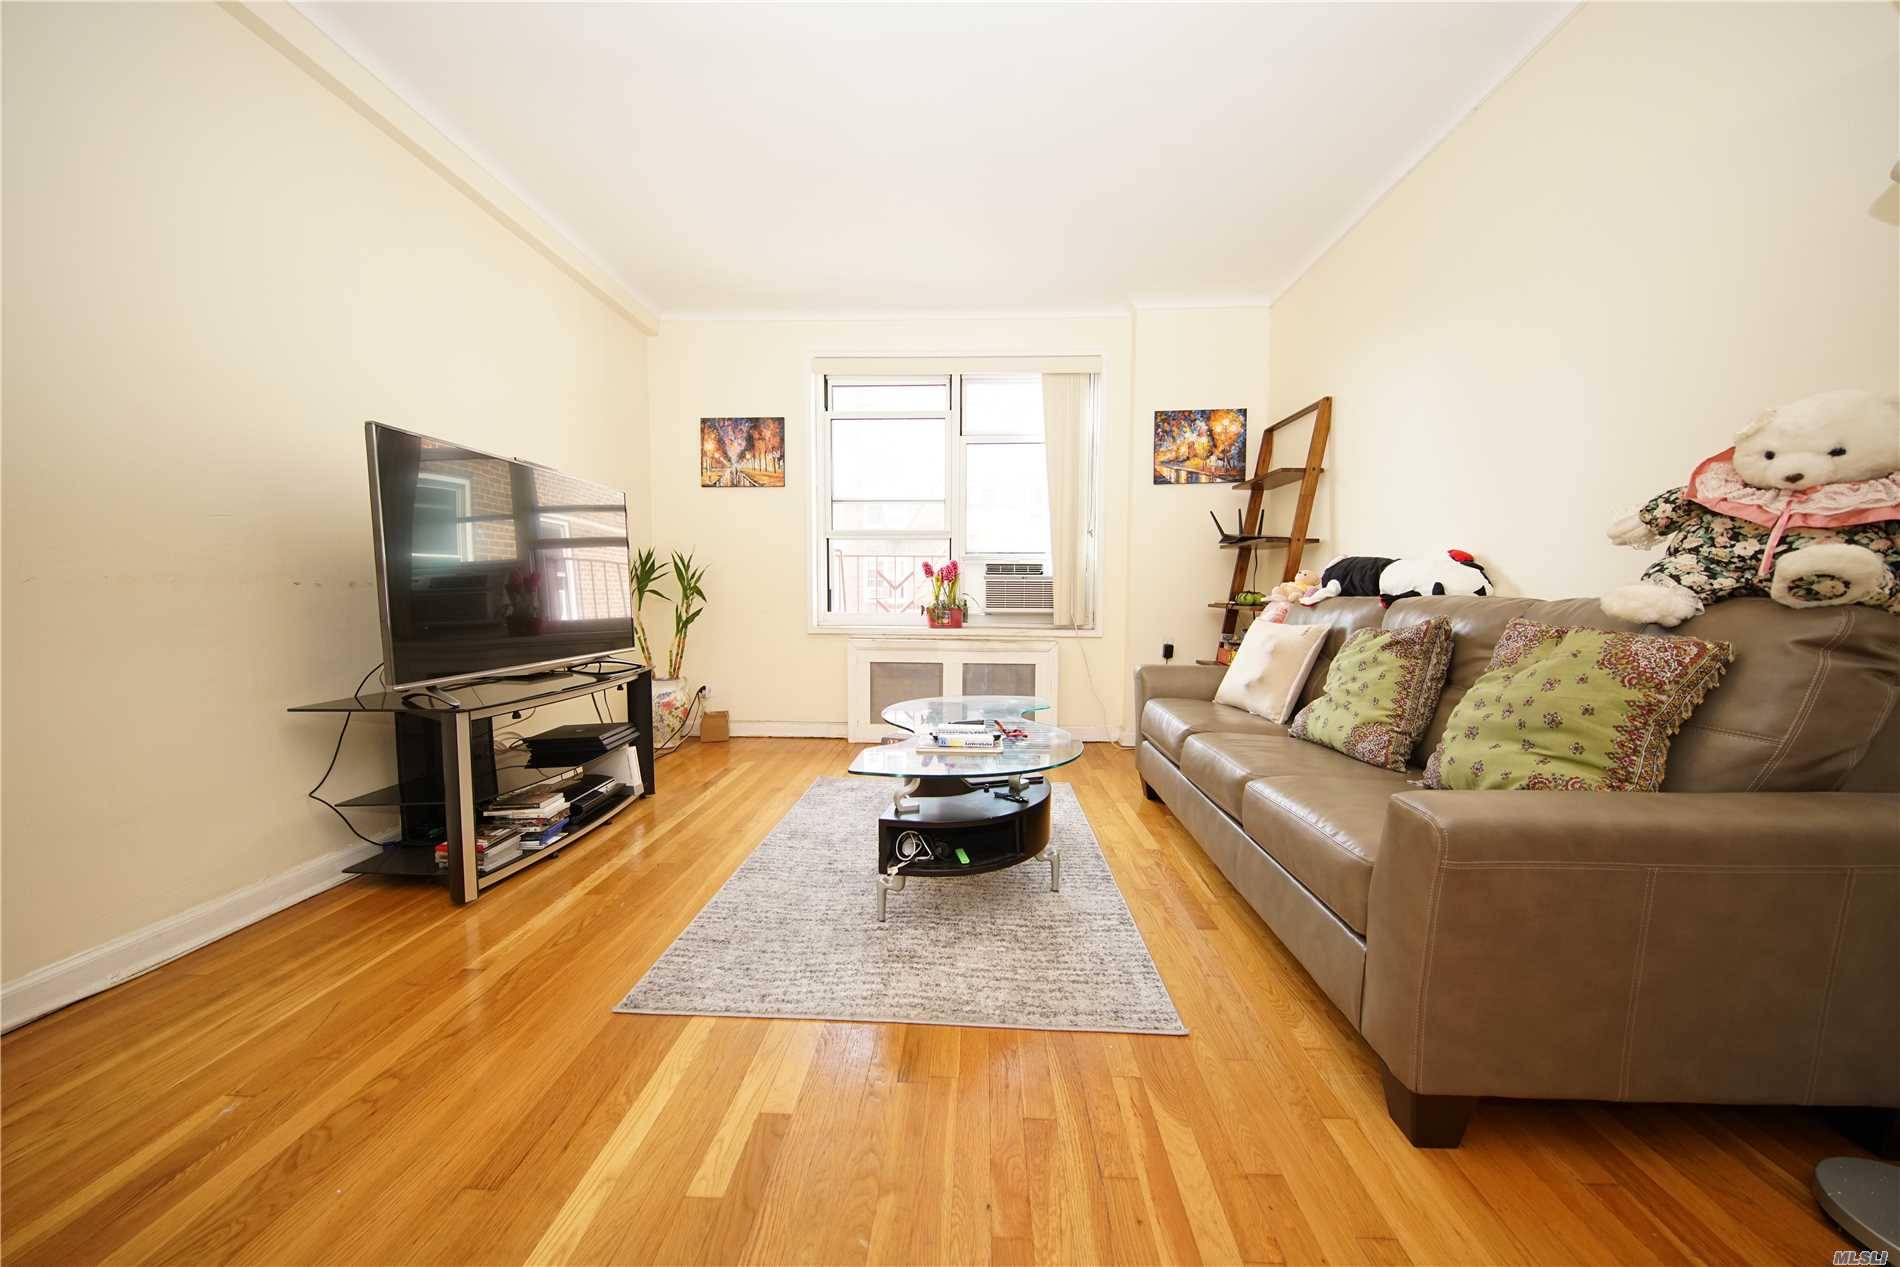 Junior 4 Apartment Used As 2 Bedroom, Located At Central Area Of Rego Park, Only 2 Block From M, R Trains.